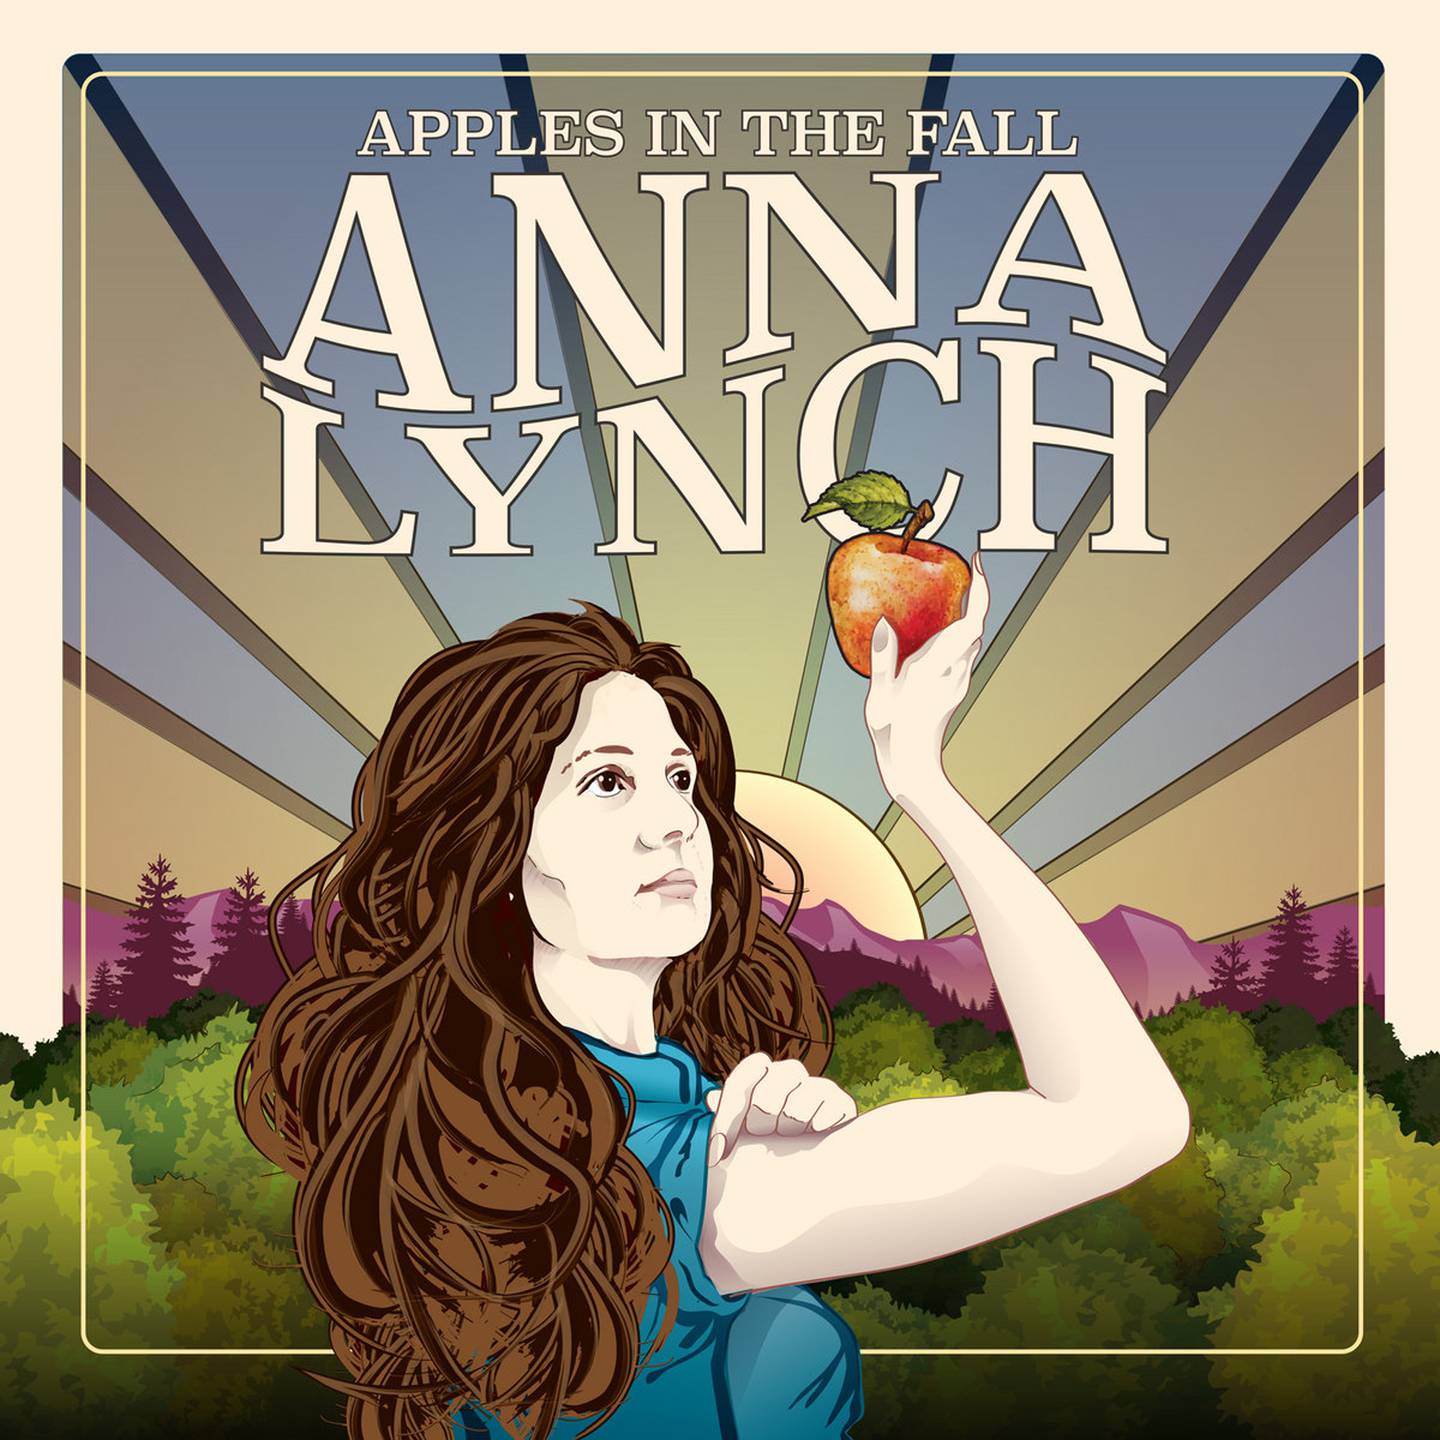 "Apples in the Fall" Anna Lynch